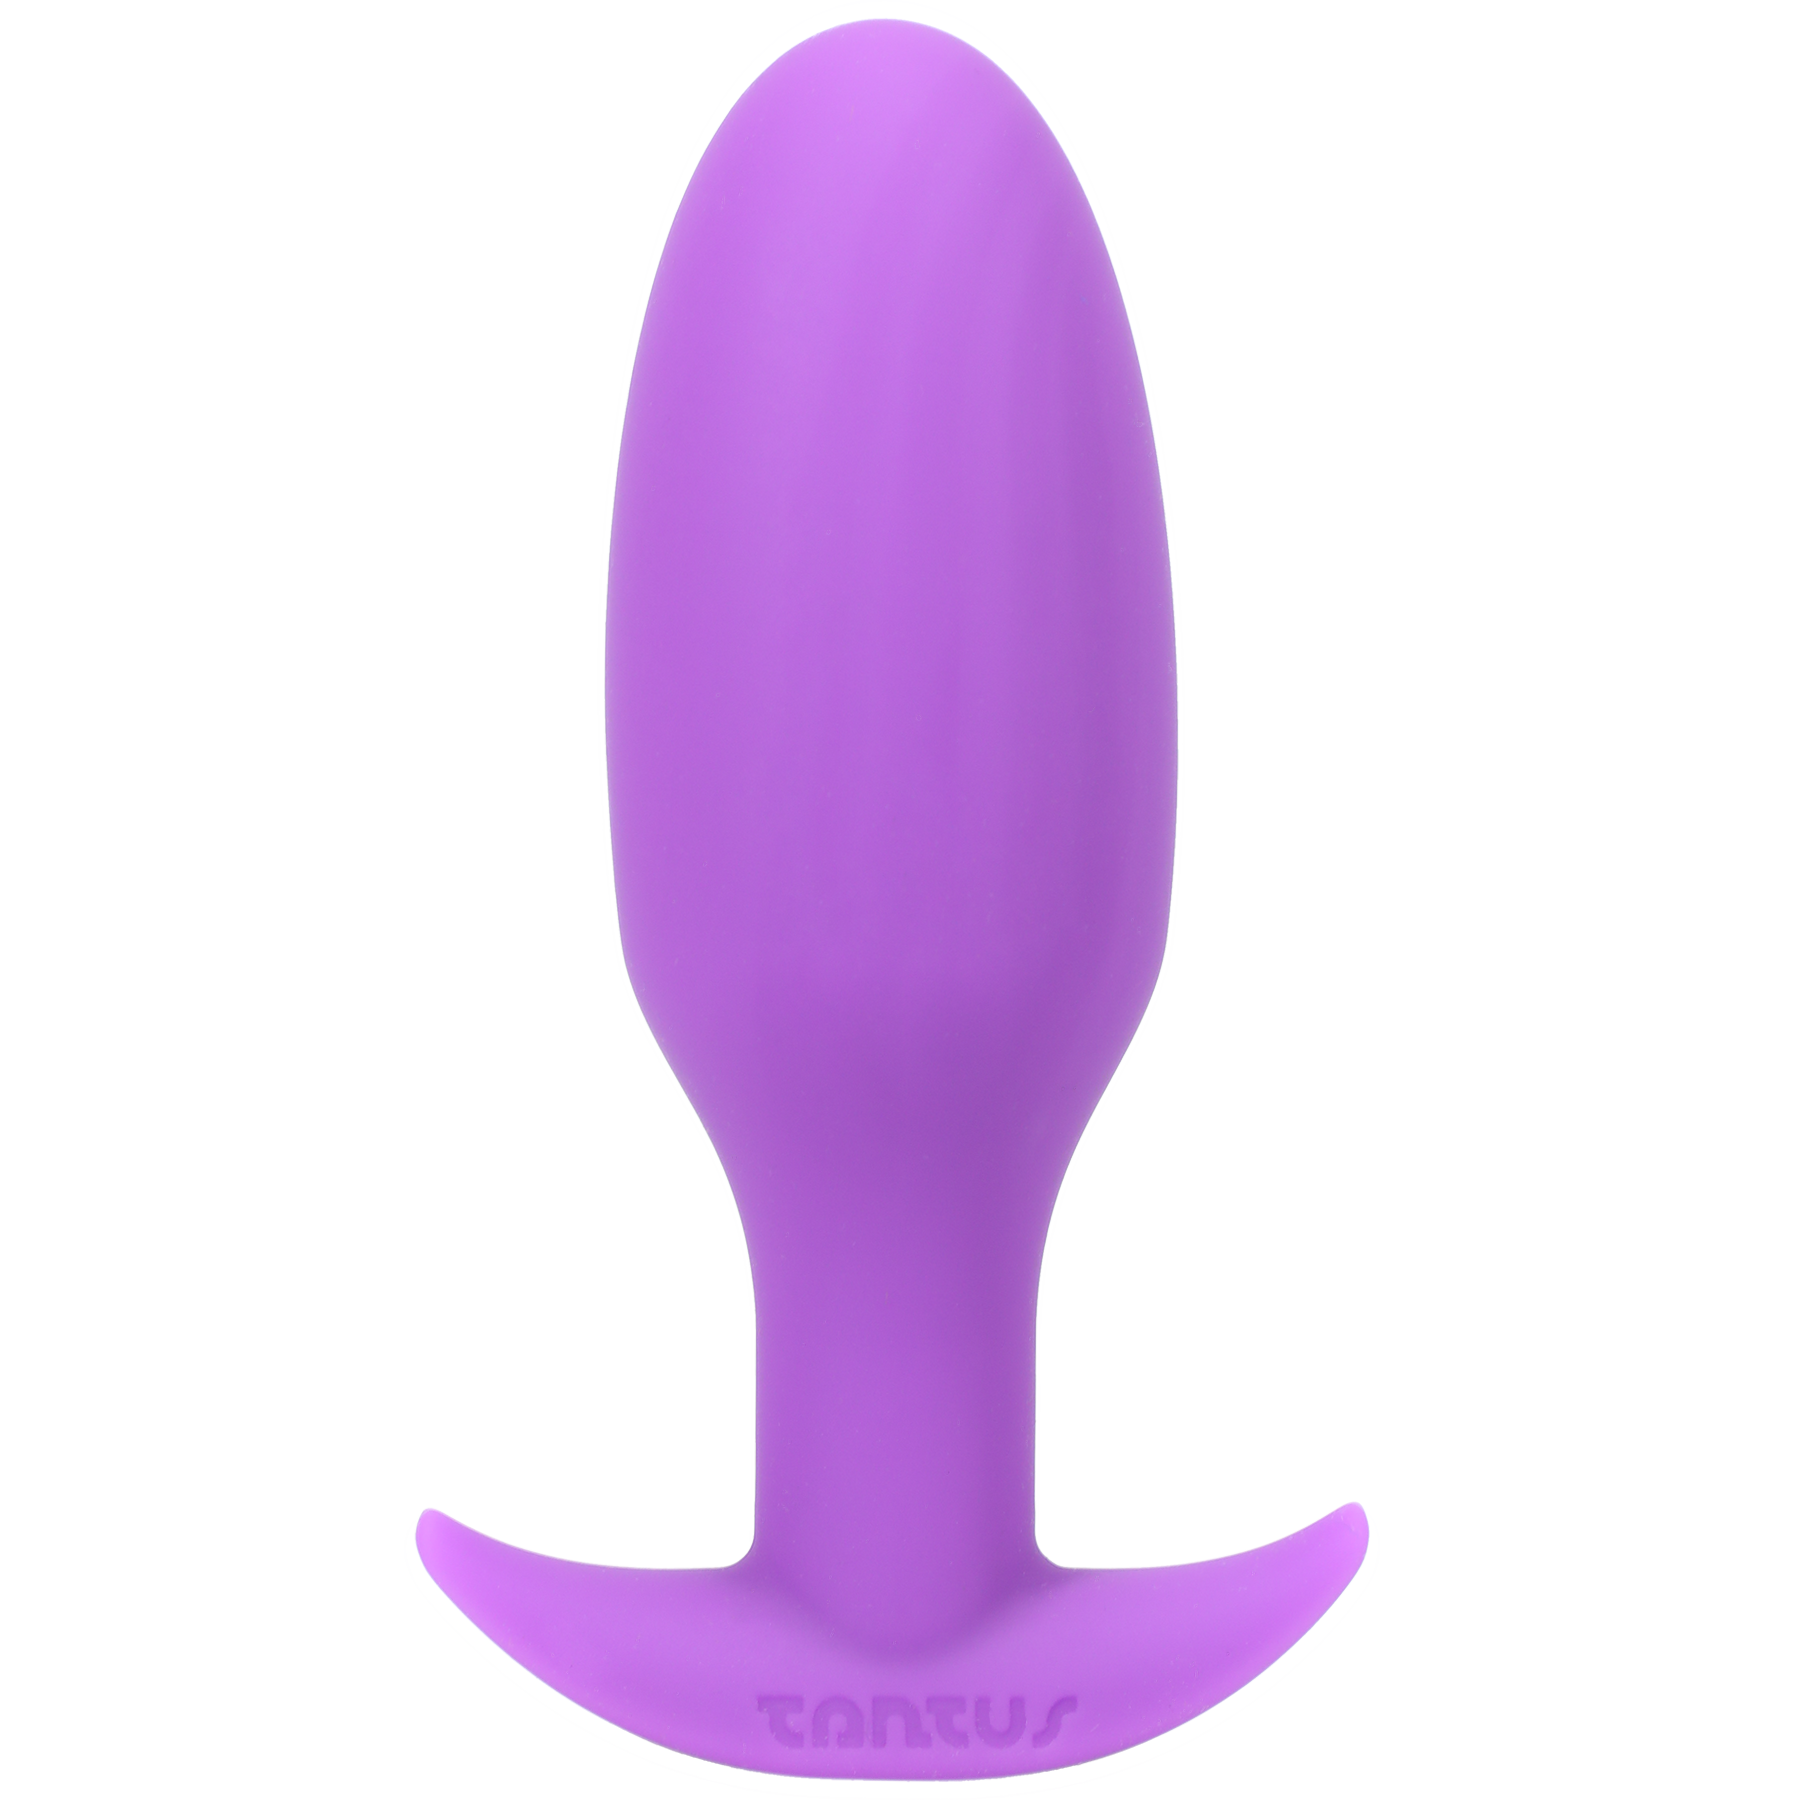 Tantus Silicone Ryder Butt Plug - Lilac